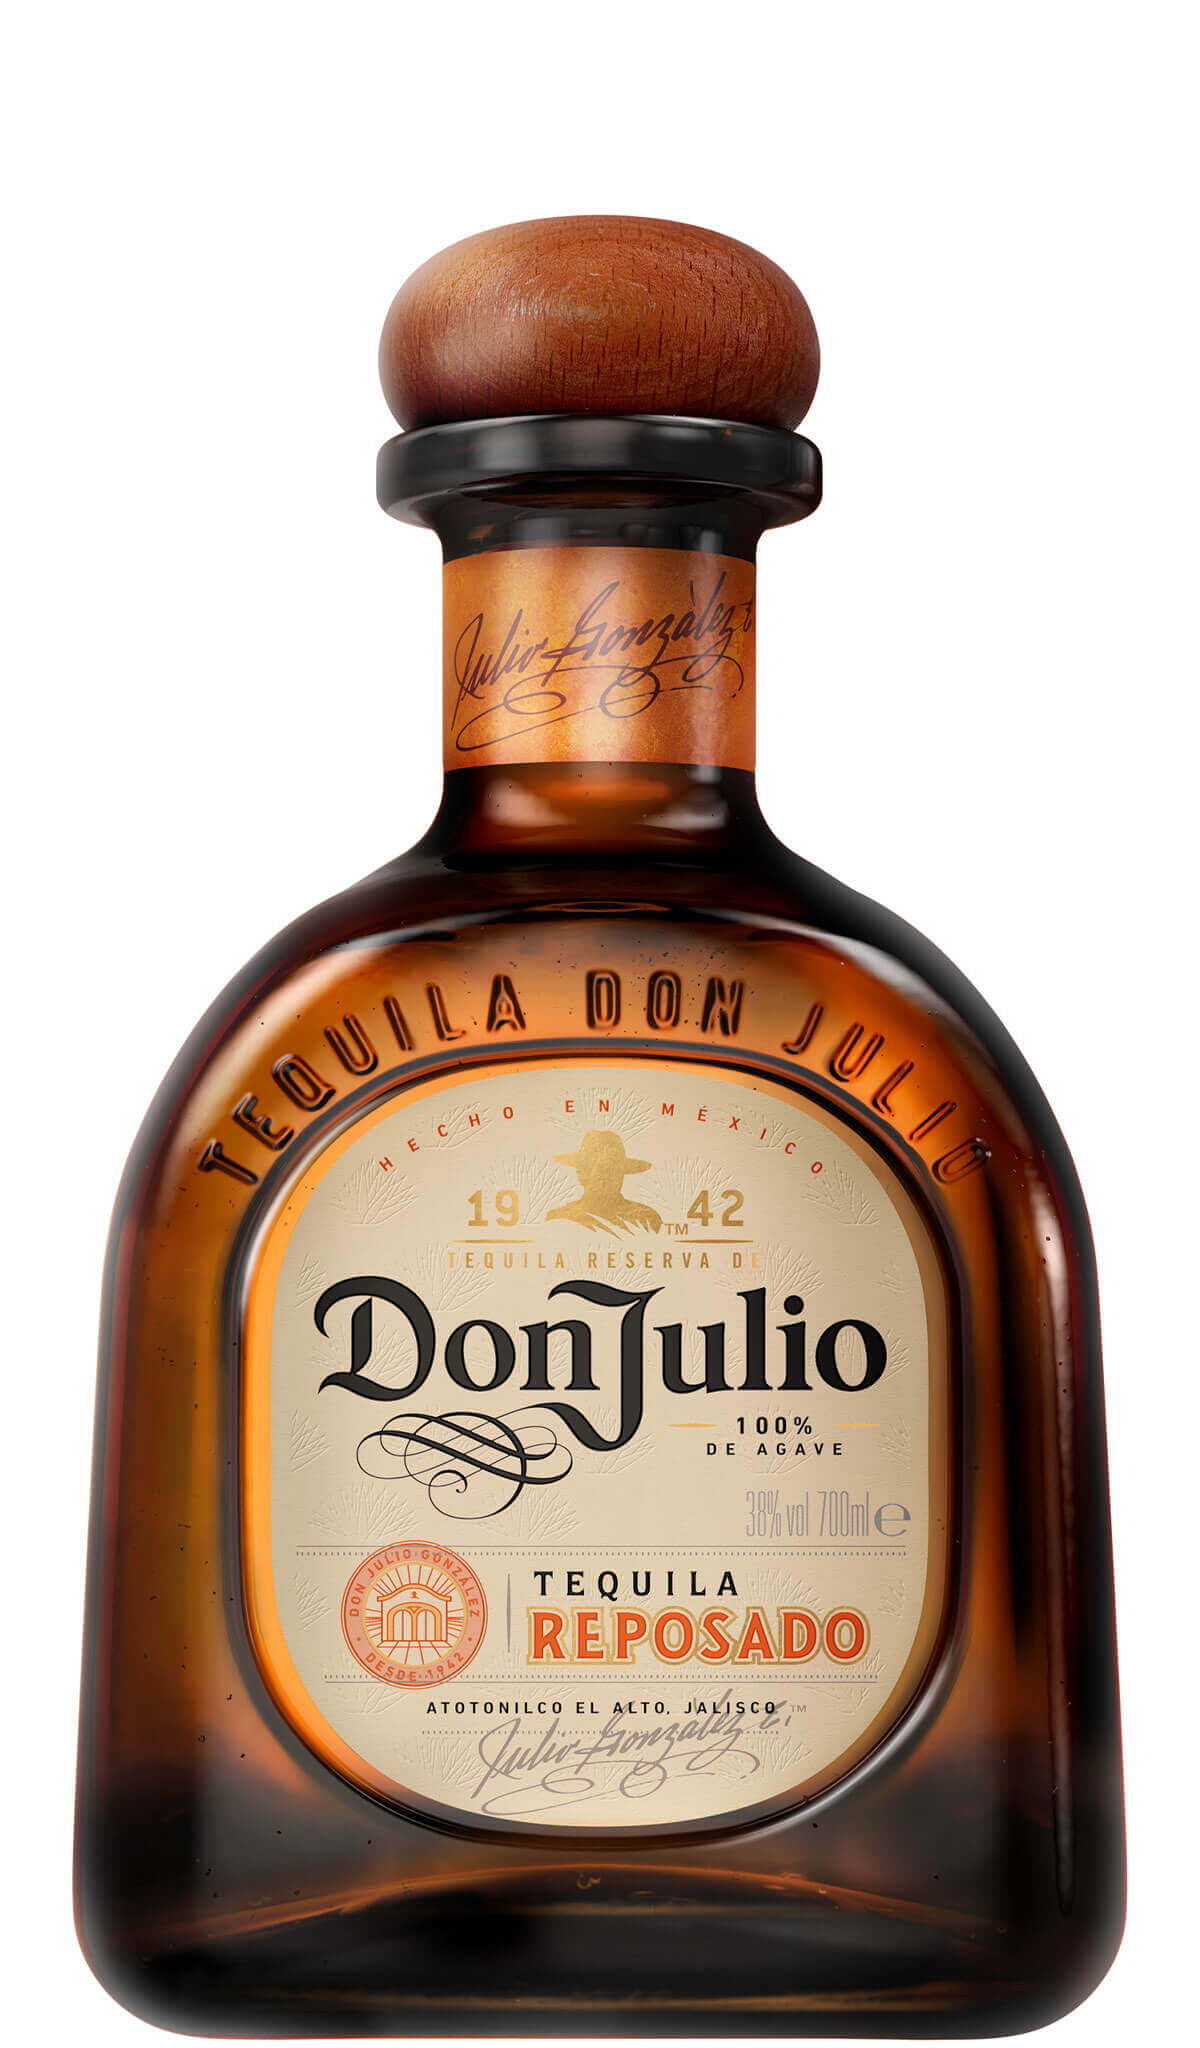 Find out more, explore the range and buy Don Julio Reposado Tequila 750mL available online at Wine Sellers Direct - Australia's independent liquor specialists.